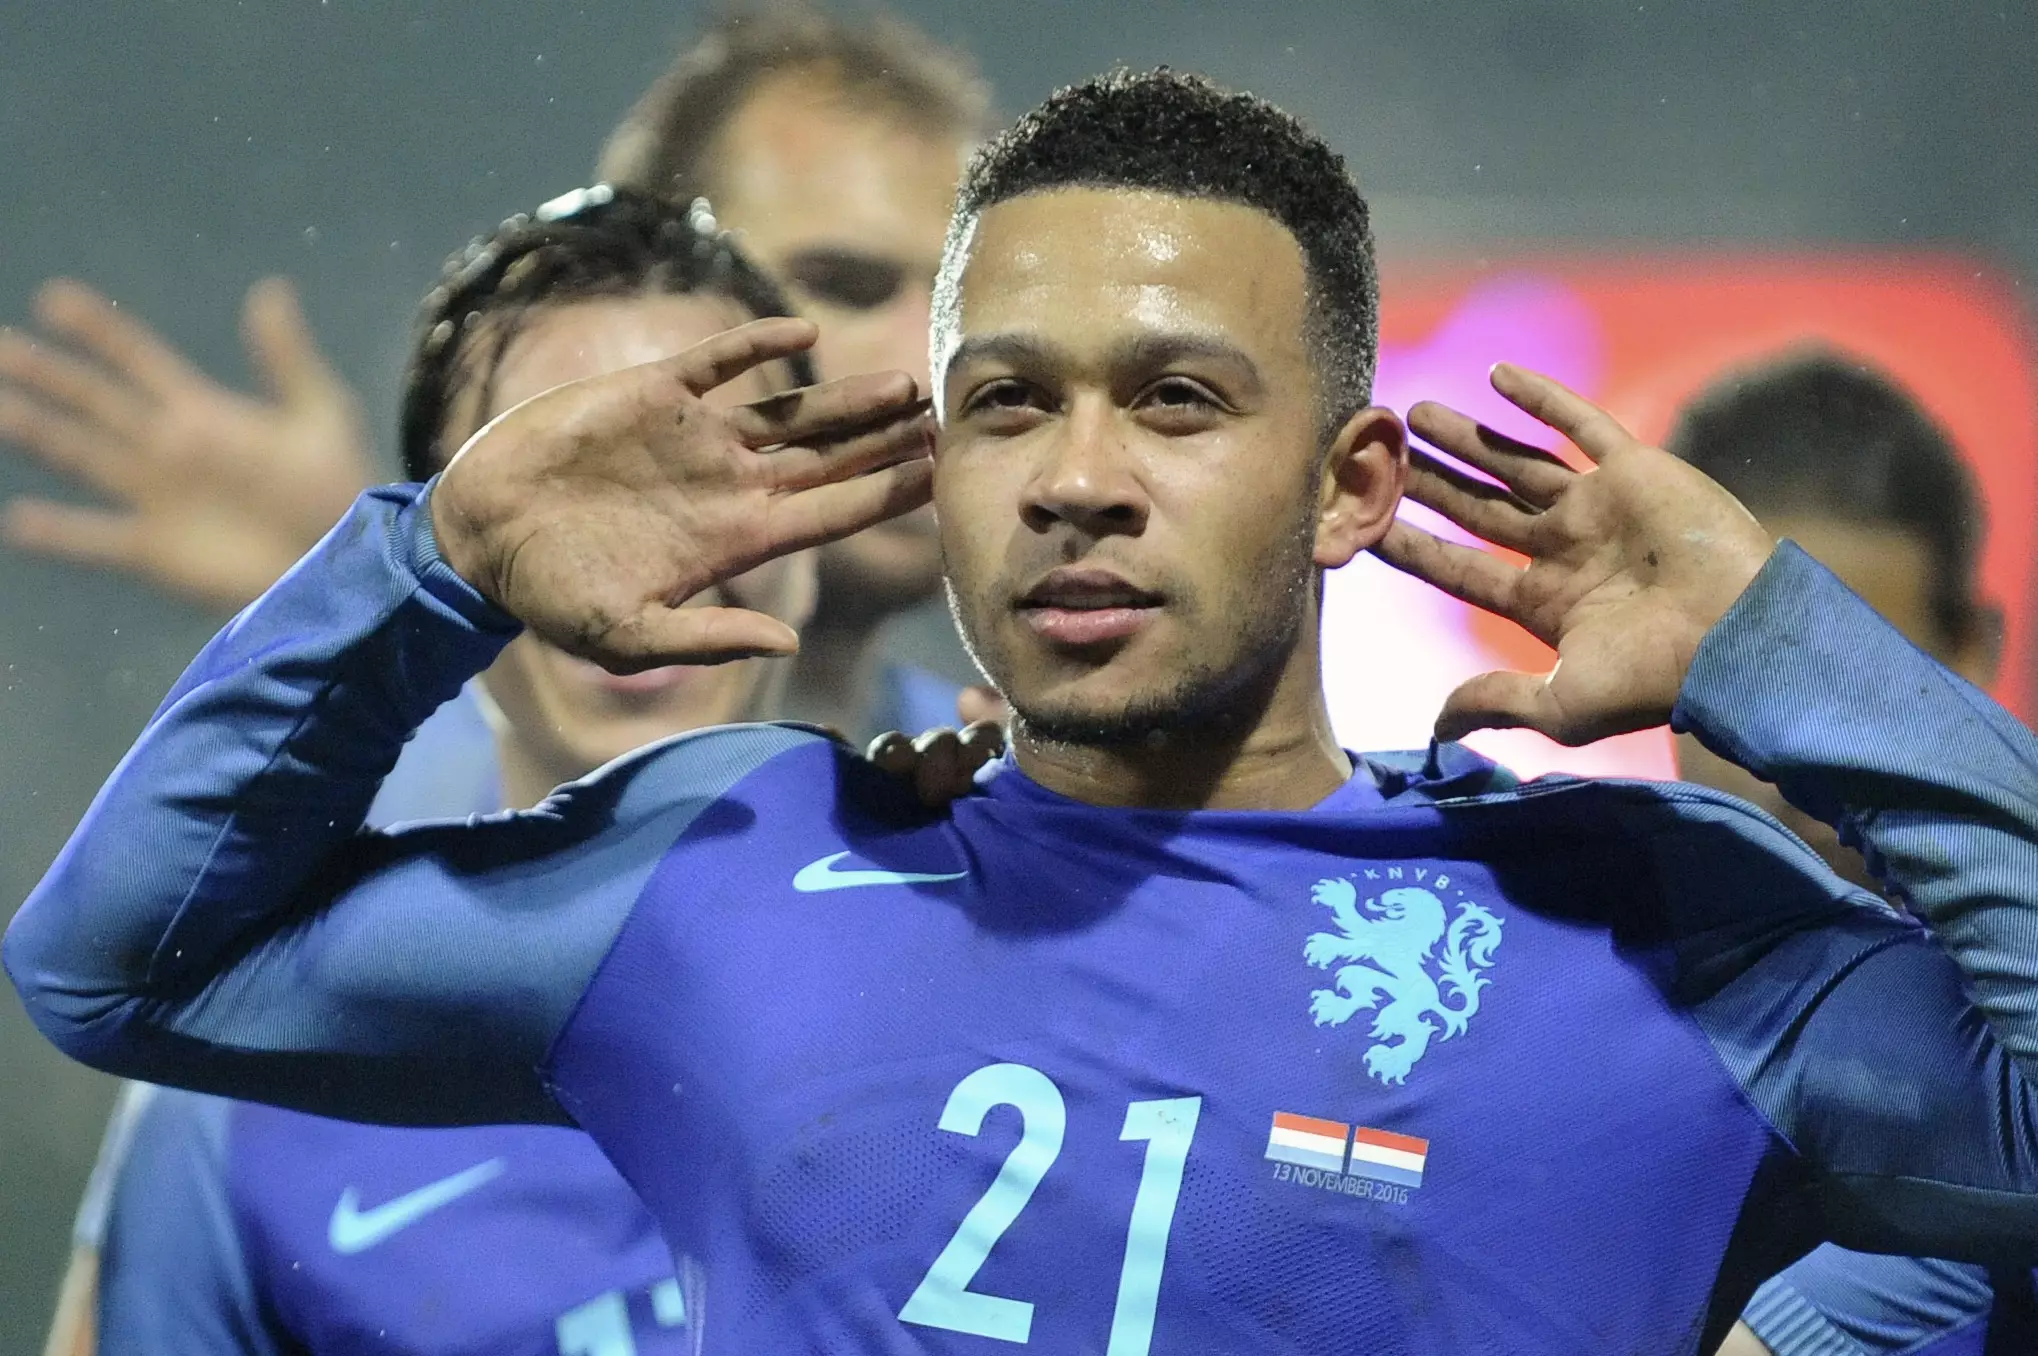 WATCH: Memphis Scores Two Excellent Goals For The Netherlands